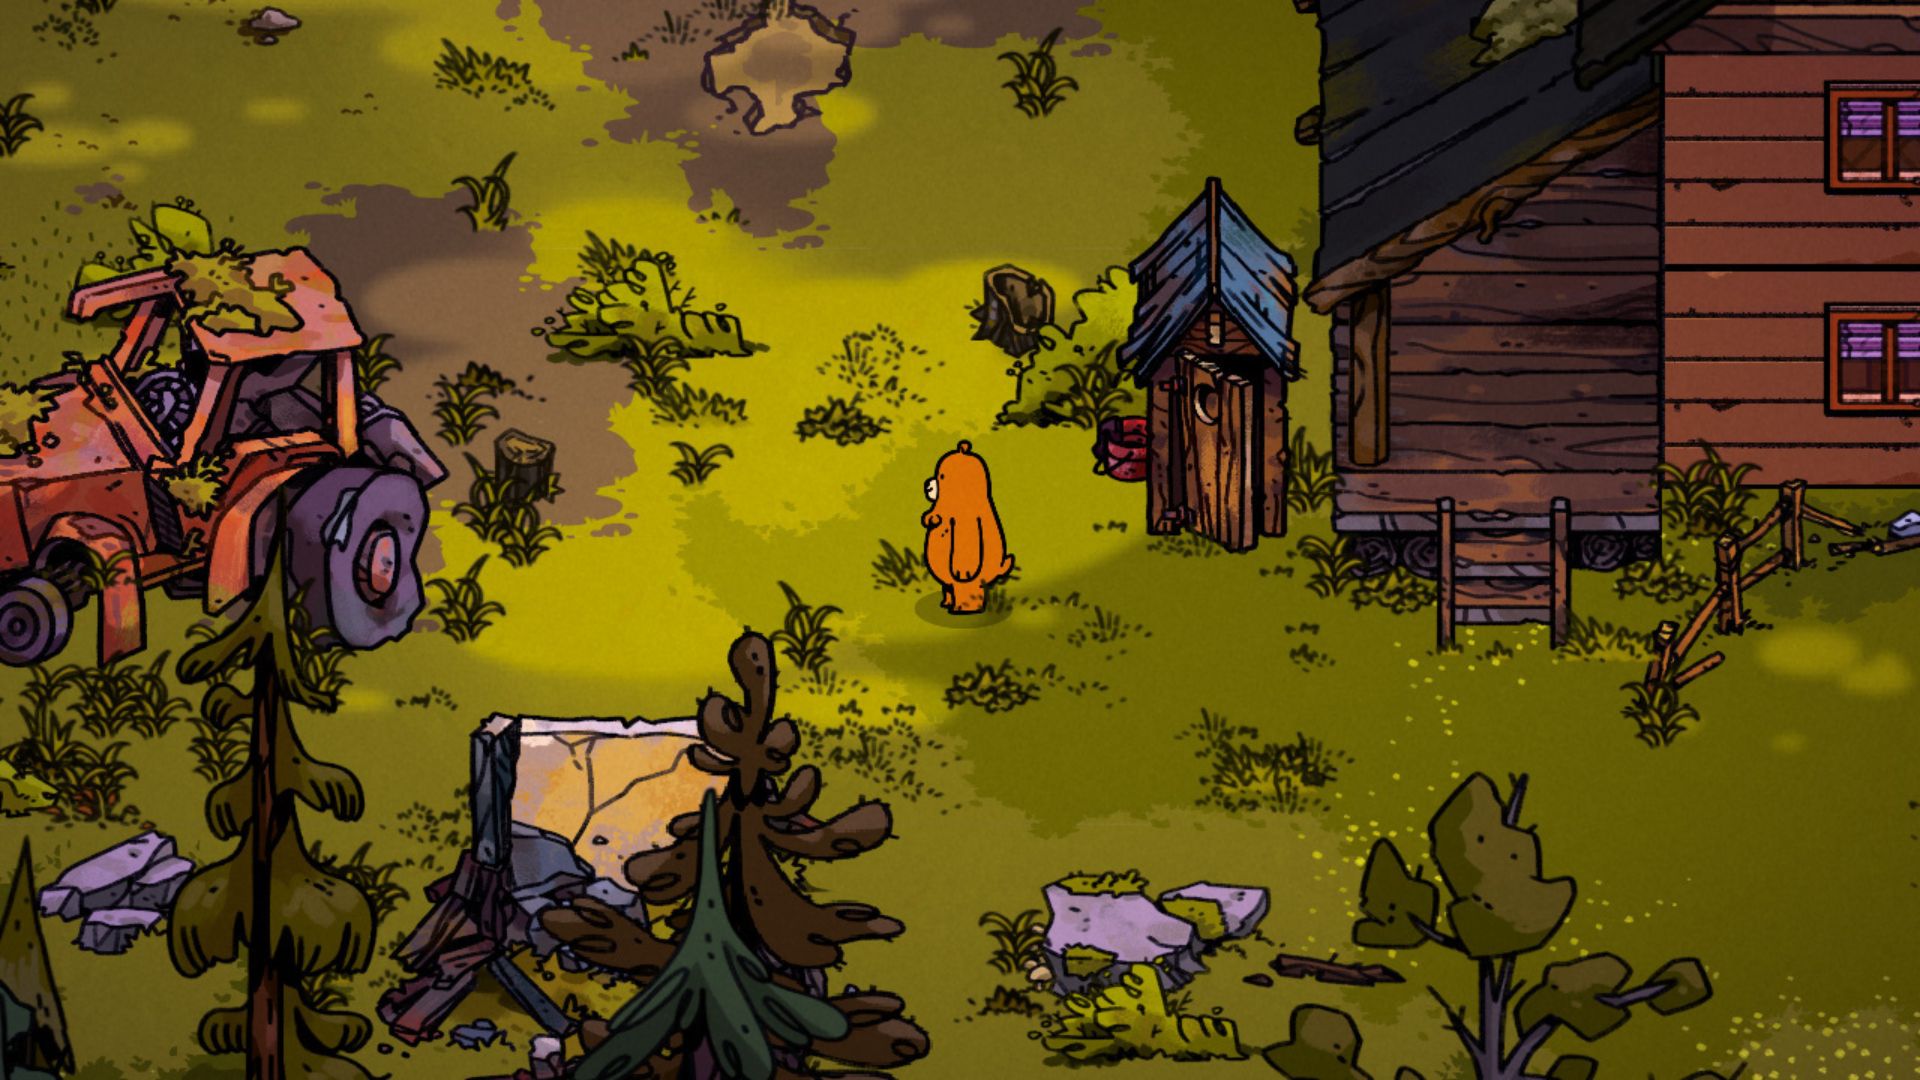 A screenshot from Bear and Breakfast showing a 2D cartoon patch of land, trees in the foreground, grass and foliage everywhere, and a run down wooden shack to the right. A bear stands right in the middle.